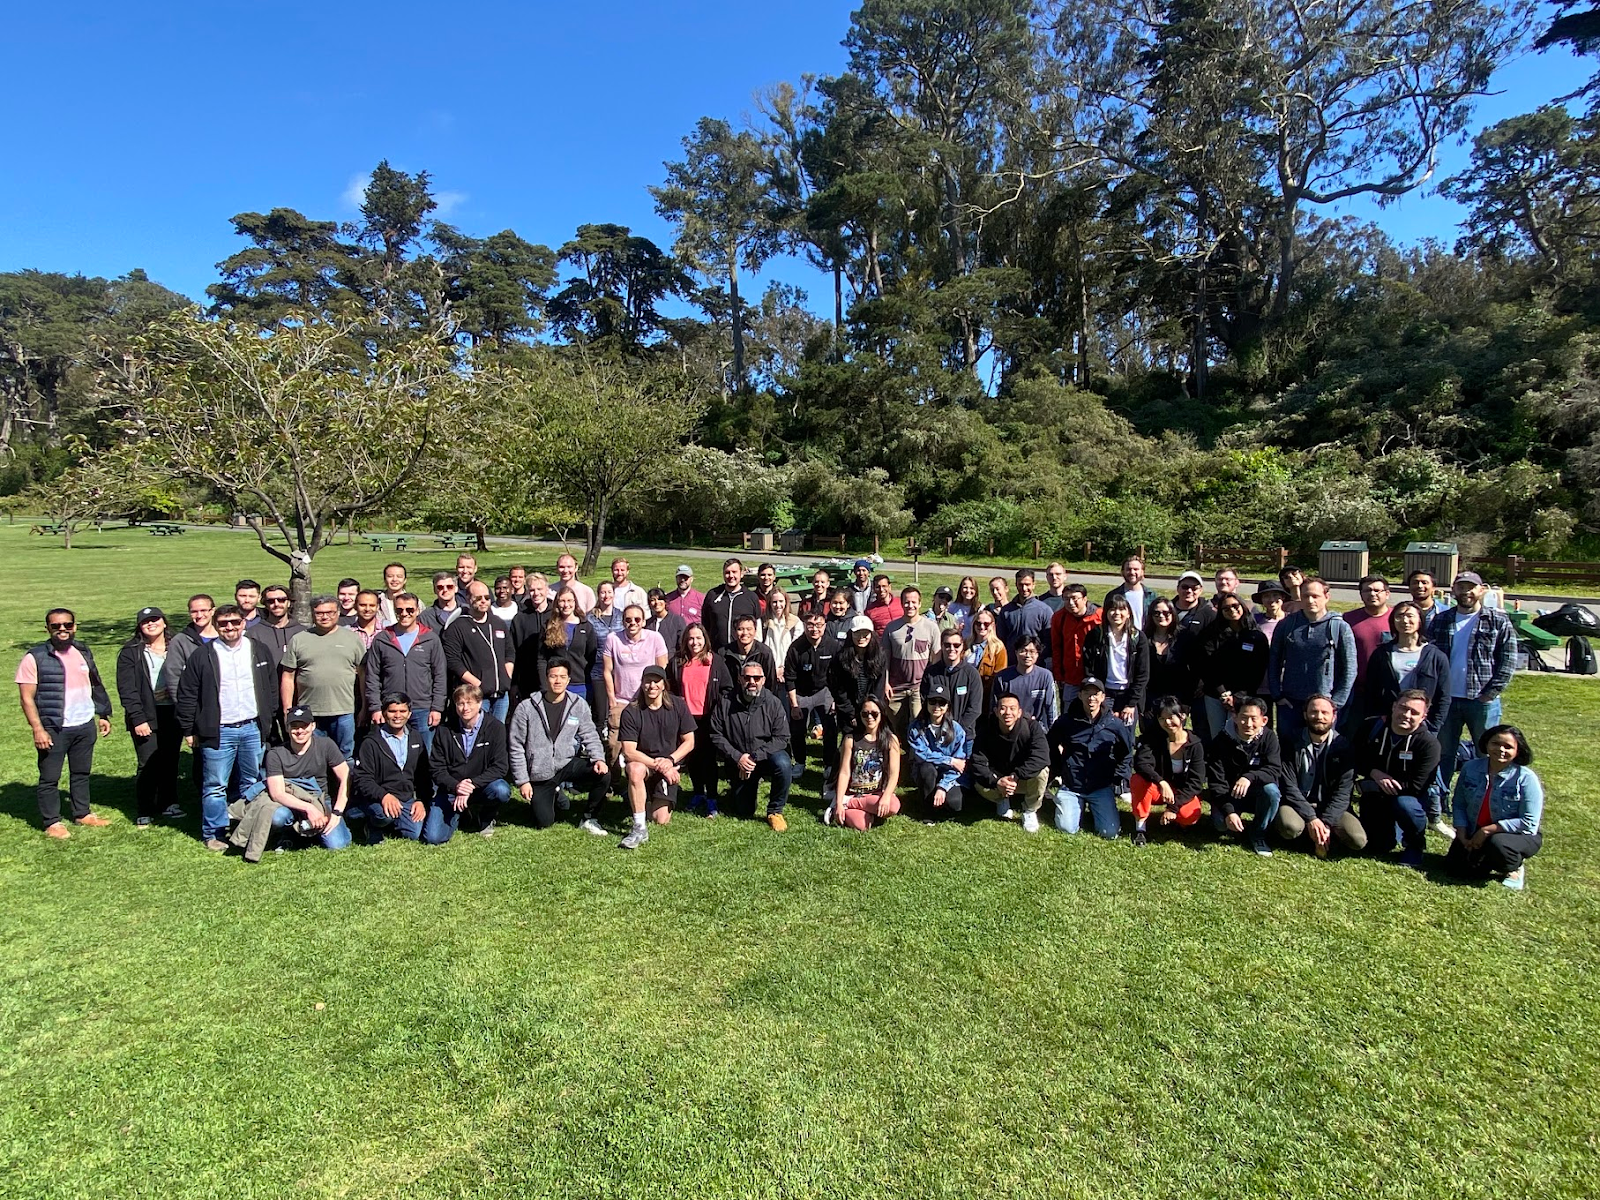 The team members who helped develop Dropbox Dash pose for a large group photo outside.